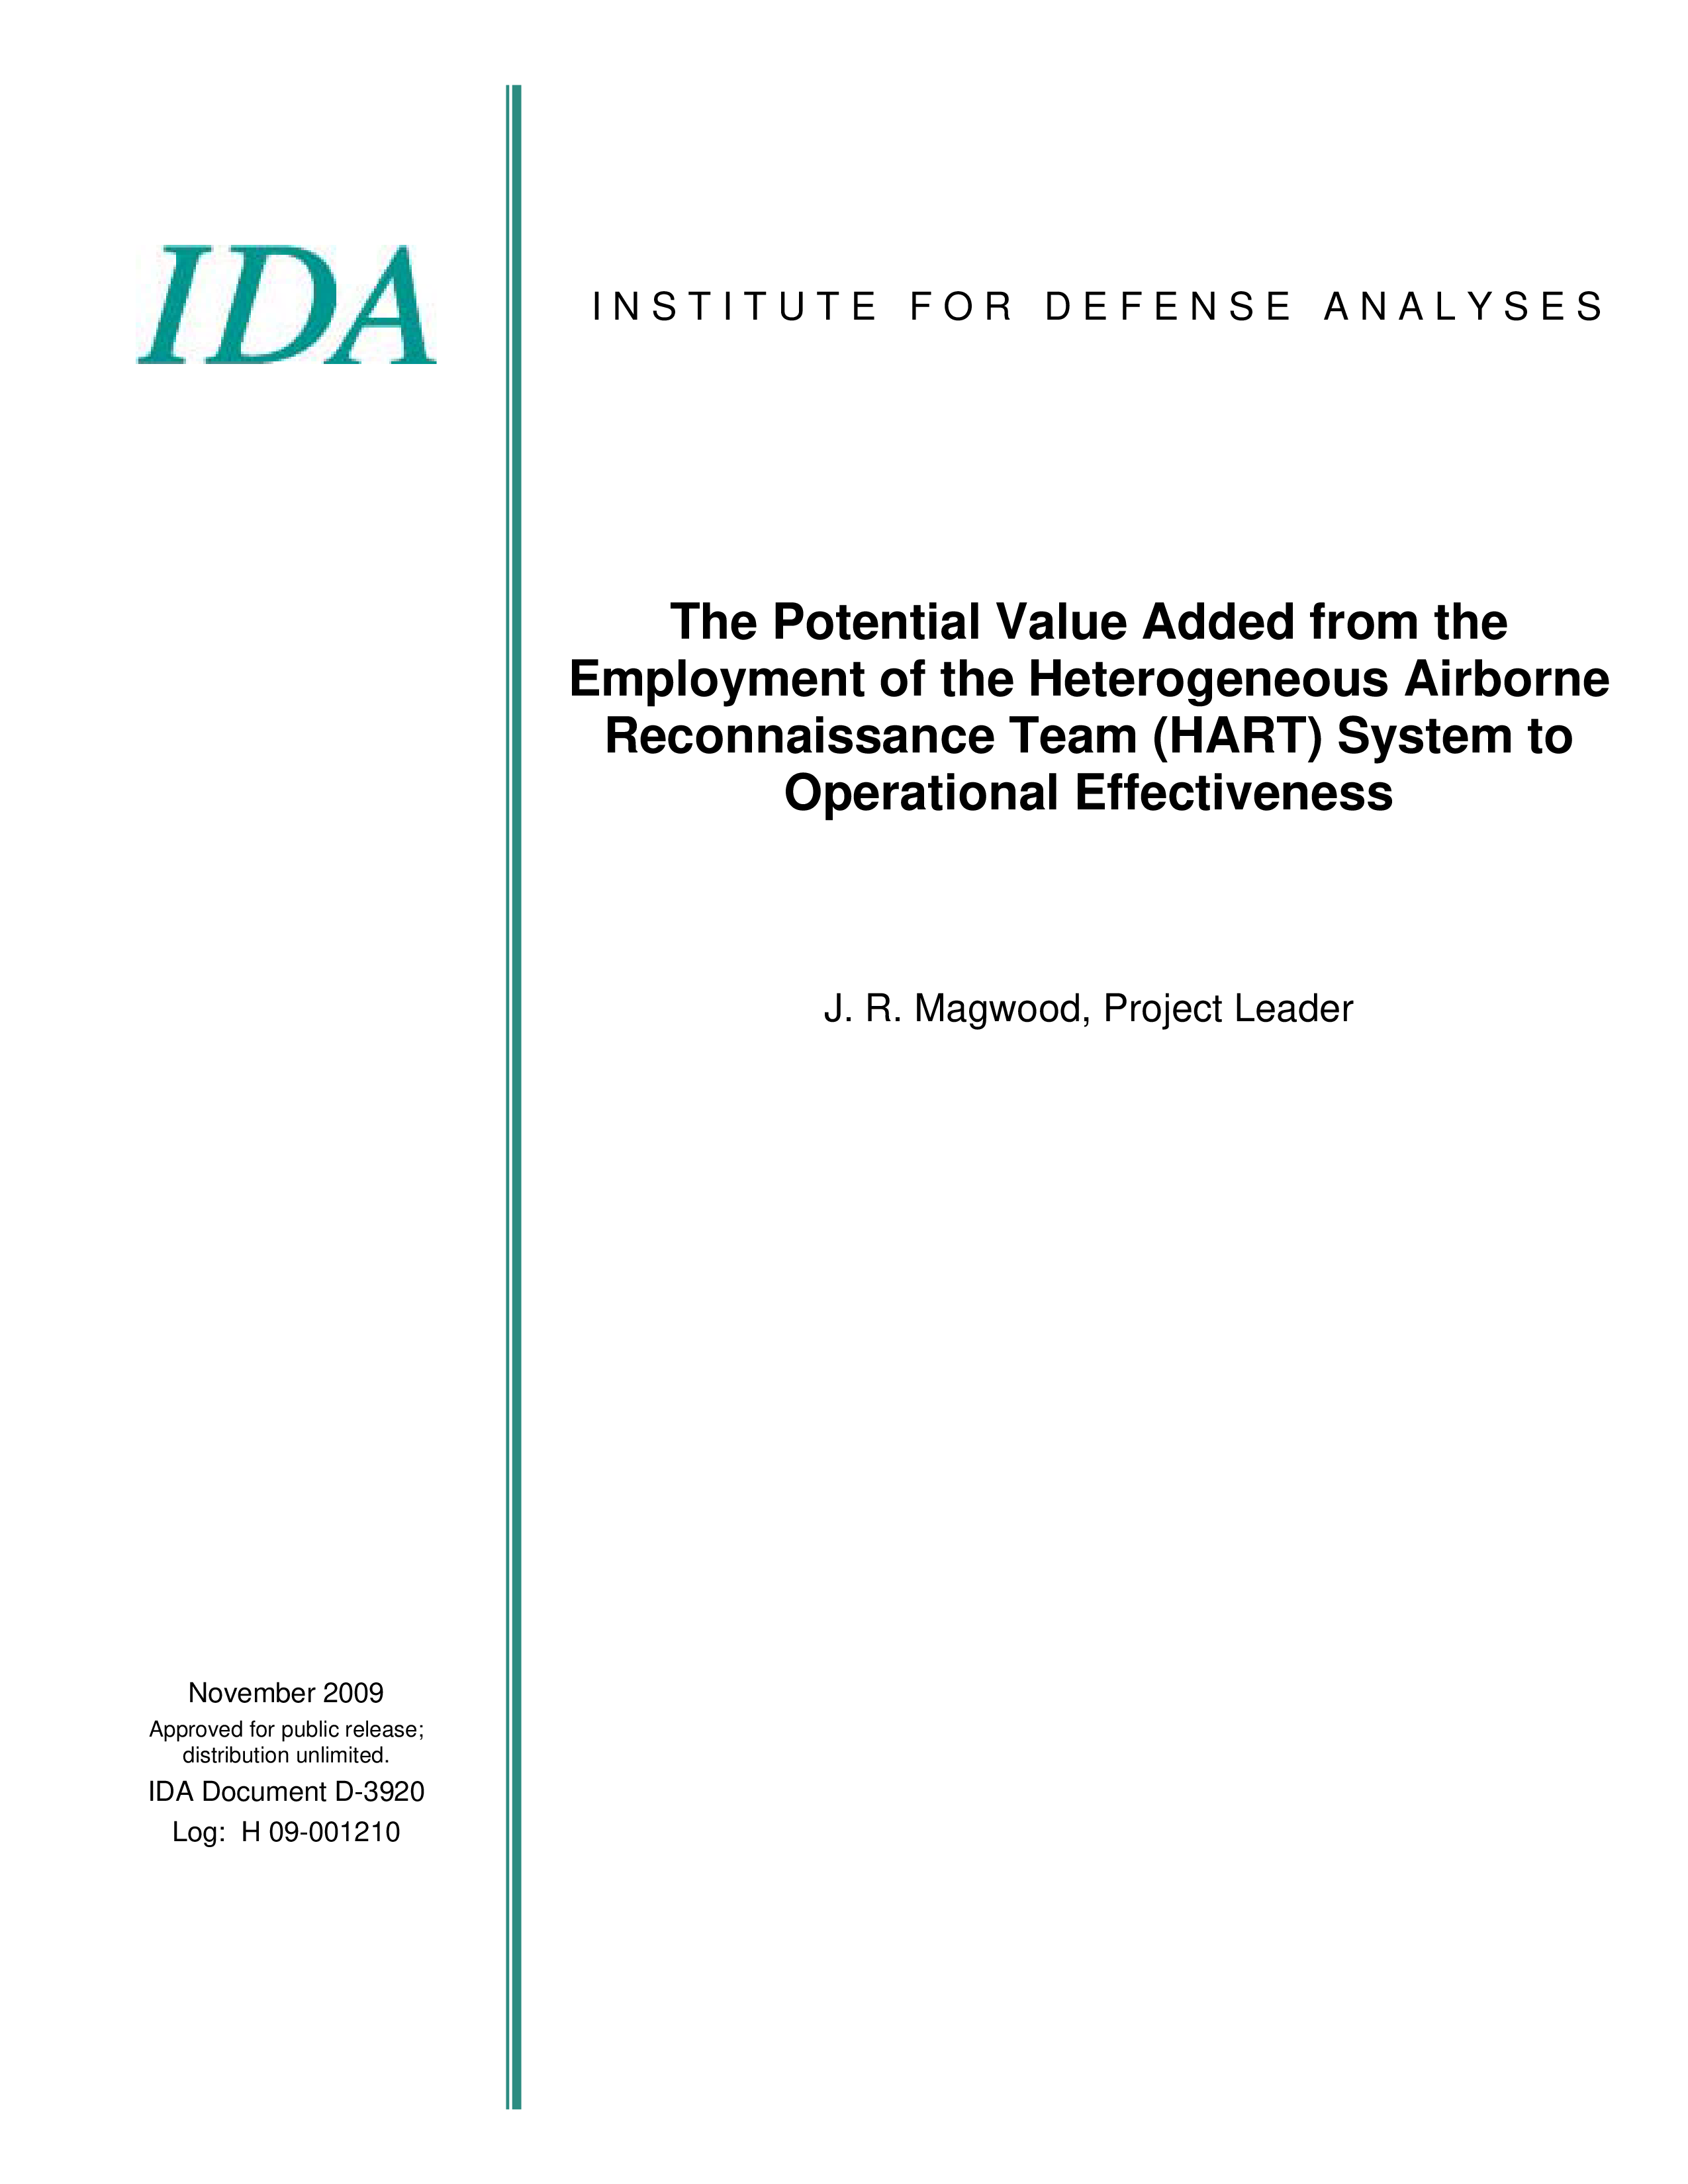 The Potential Value Added from the Employment of the Heterogeneous Airborne Reconnaissance Team (HART) System to Operational Effectiveness